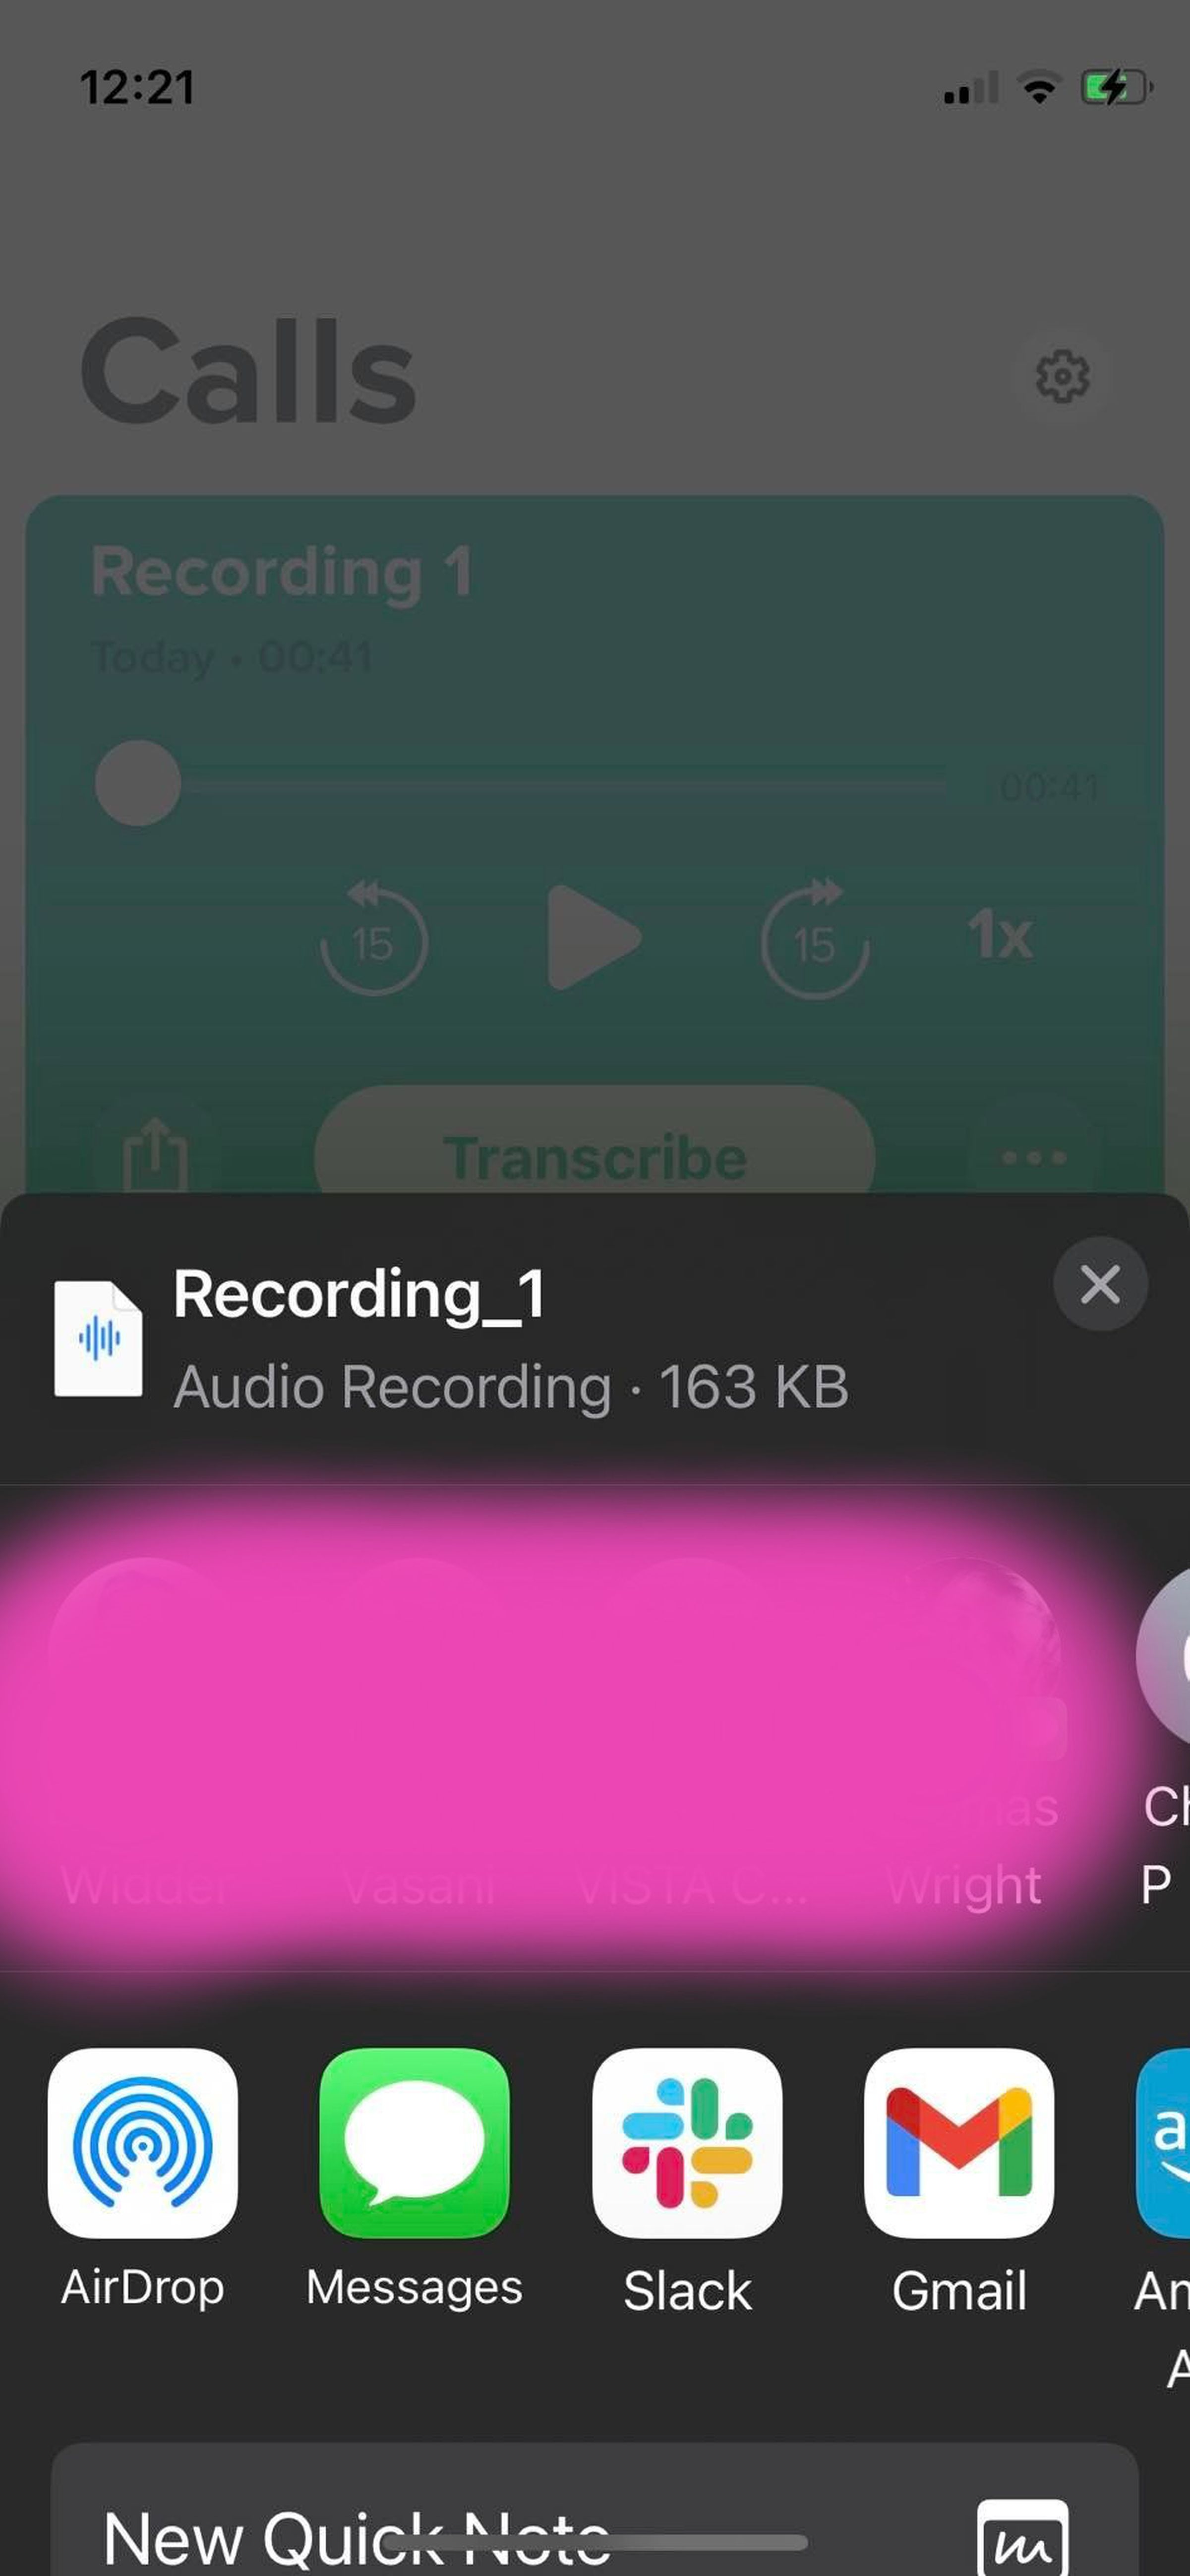 Rev Call Recorder app menu displaying services you can use to share the recording, like AirDrop, Messages, Gmail, and more.